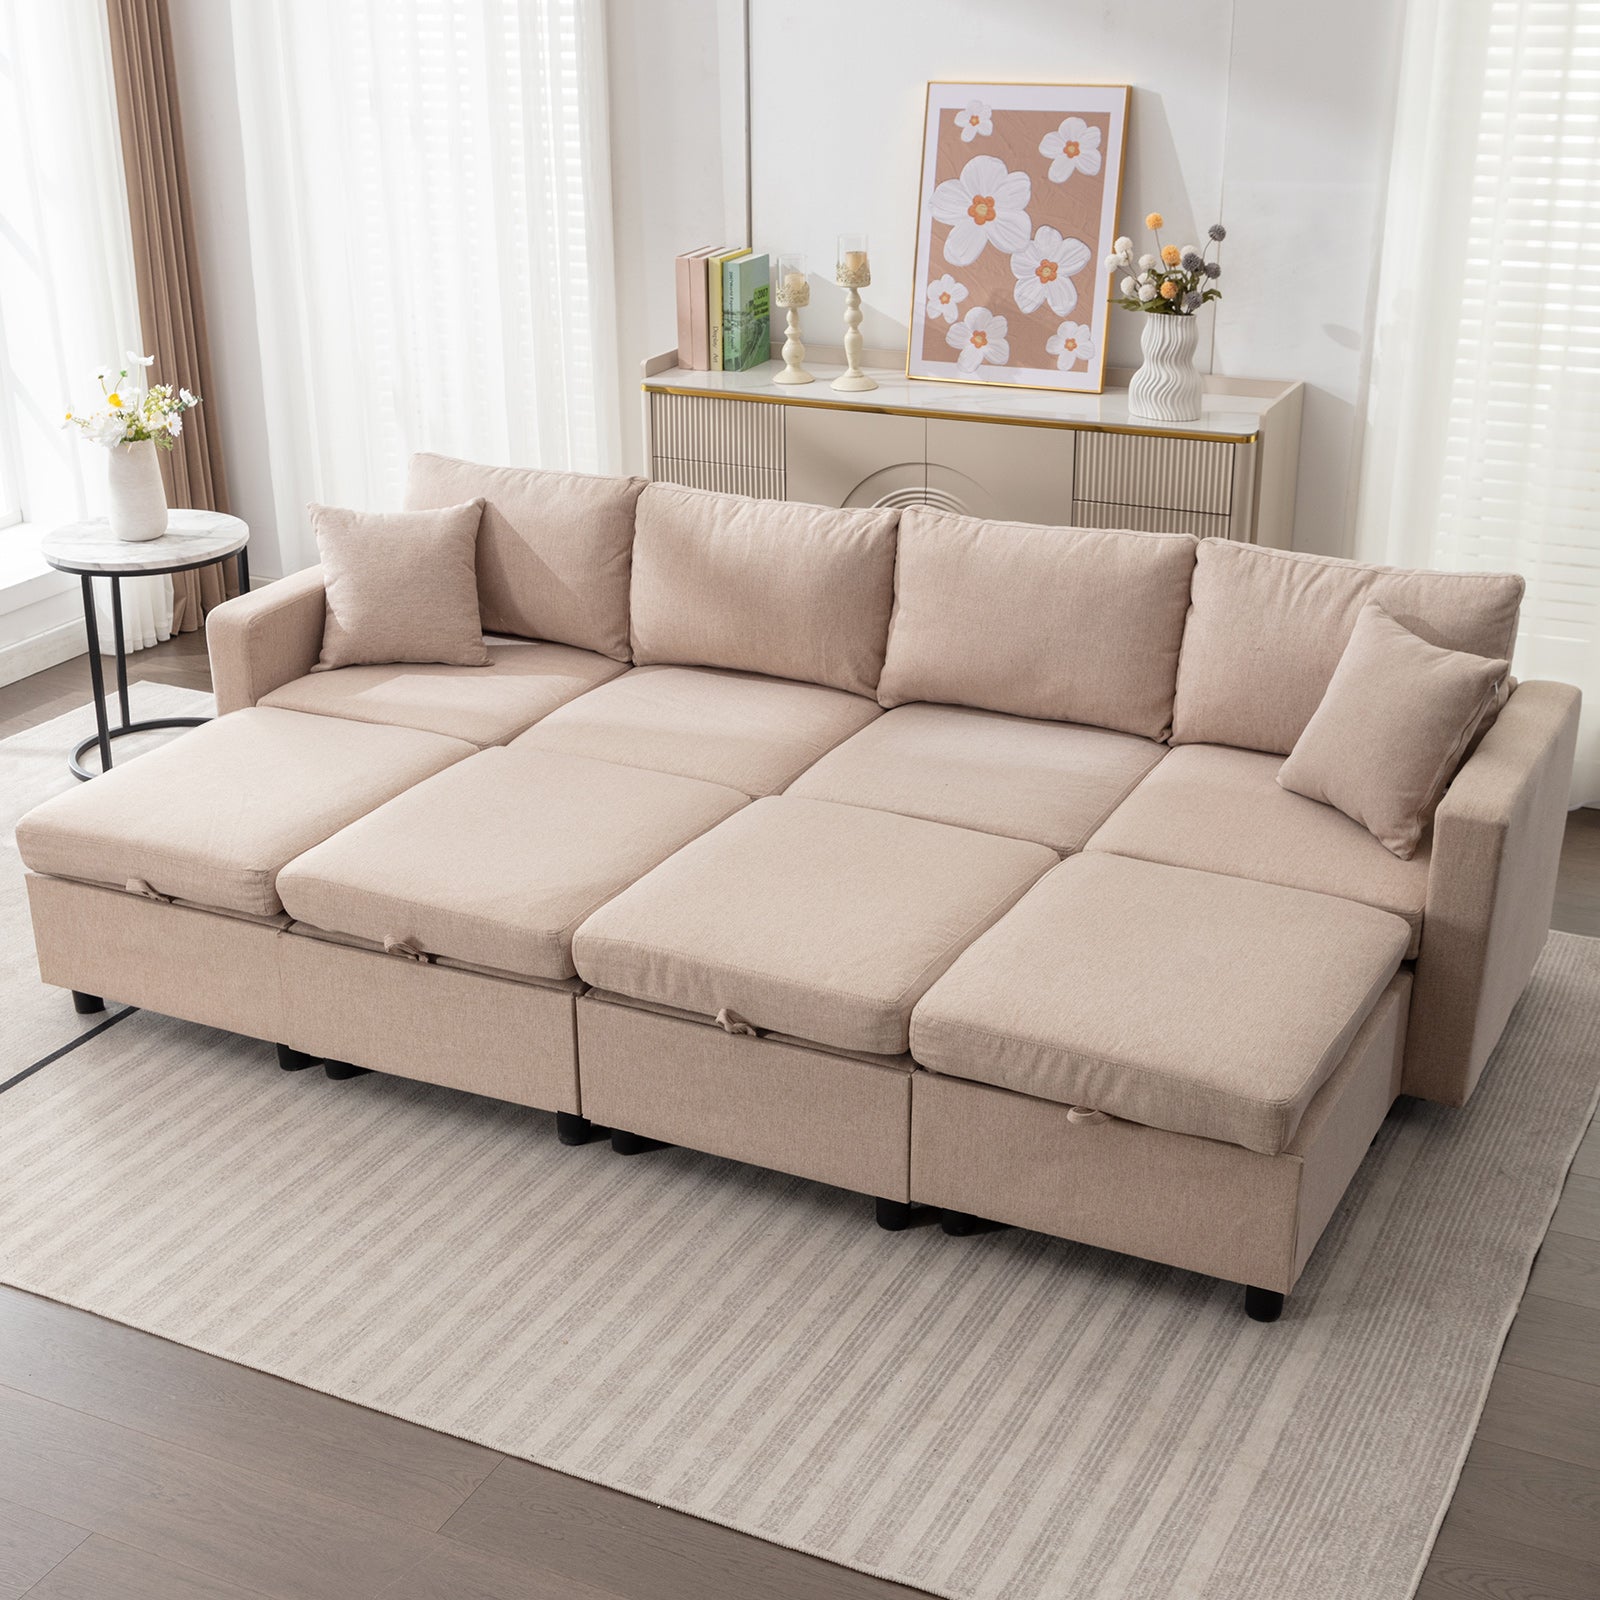 Mjkone Sectional Sofa Couch for Living Room, Modern Seat Couches/ Storage Space/Memory Foam Cushions/Linen Fabric/Soft Sponge Seaters/Easy Assembly